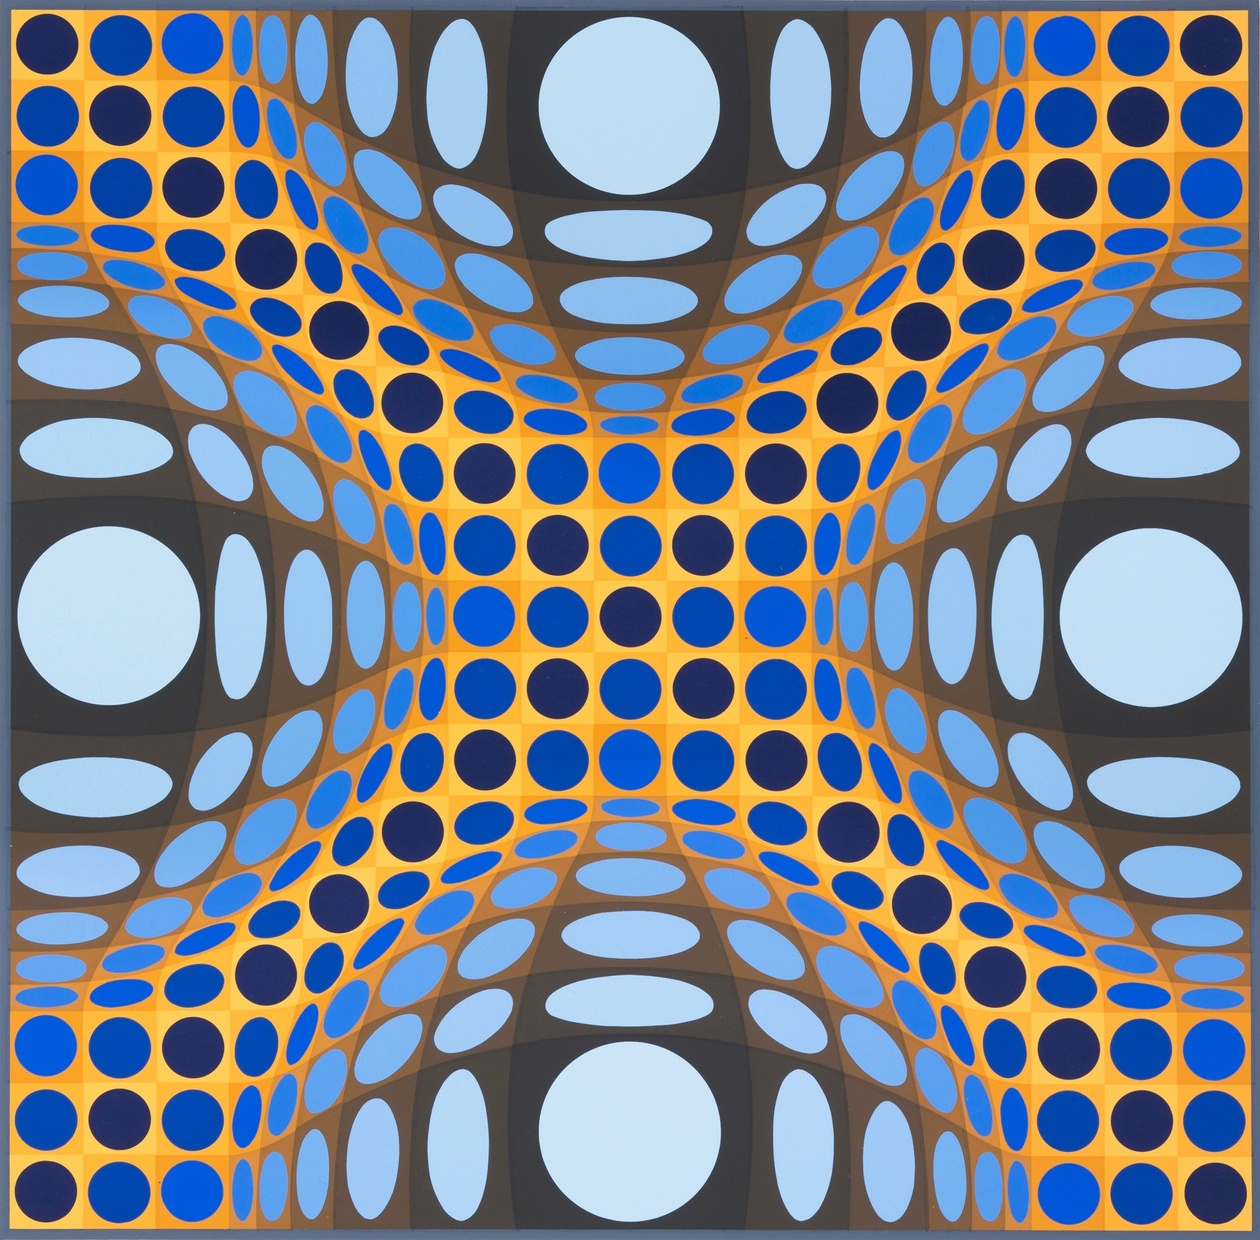 An abstract, optical illusion of blue and black circles on a yellow and black background.